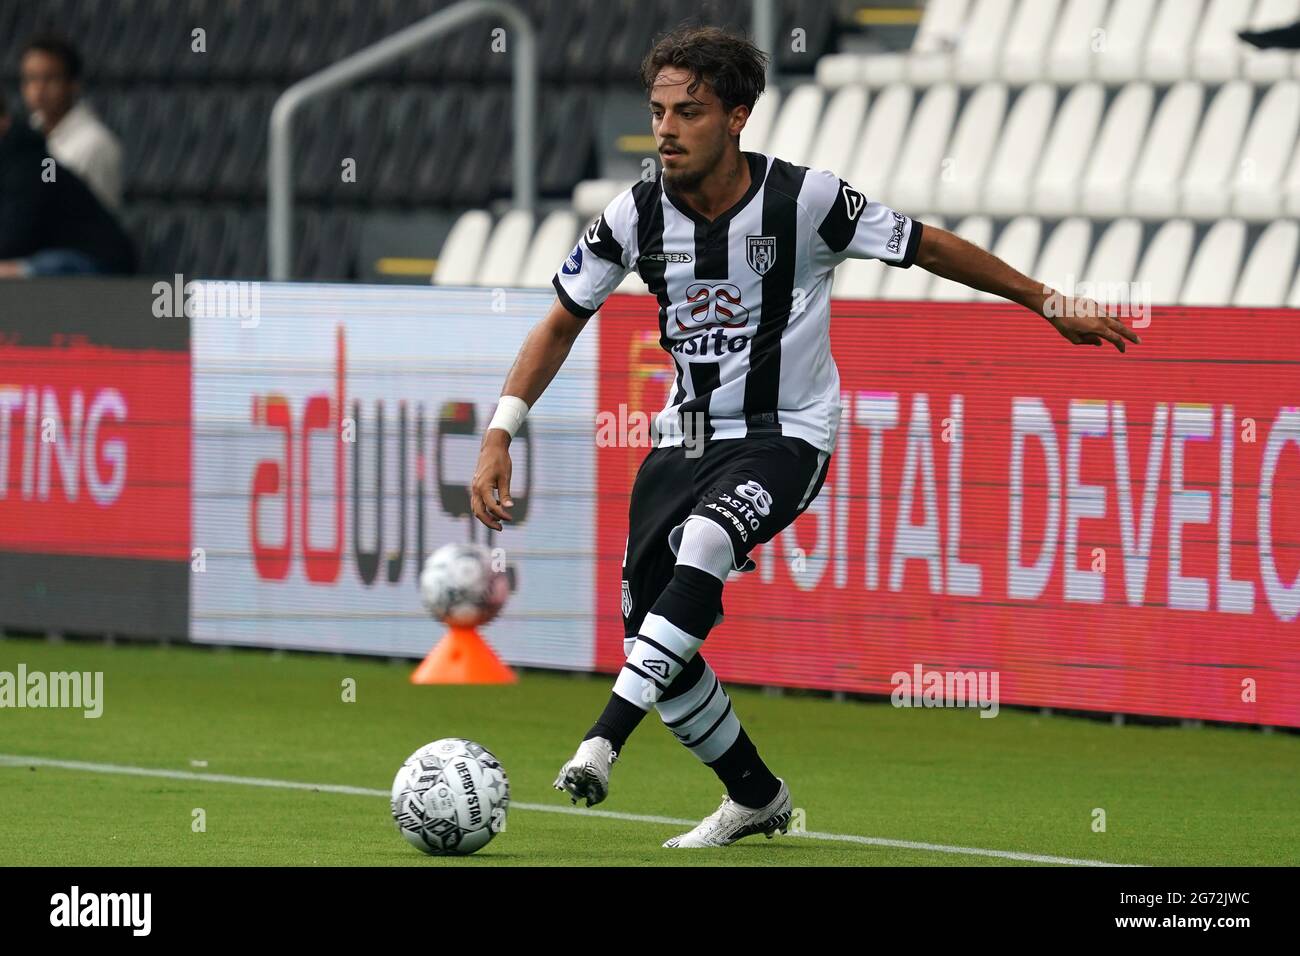 ALMELO, NETHERLANDS - JULY 10: Giacomo Quagliata of Heracles Almelo during  the Pre Season Friendly match between Heracles Almelo and Go Ahead Eagles  at the Erve Asito on July 10, 2021 in